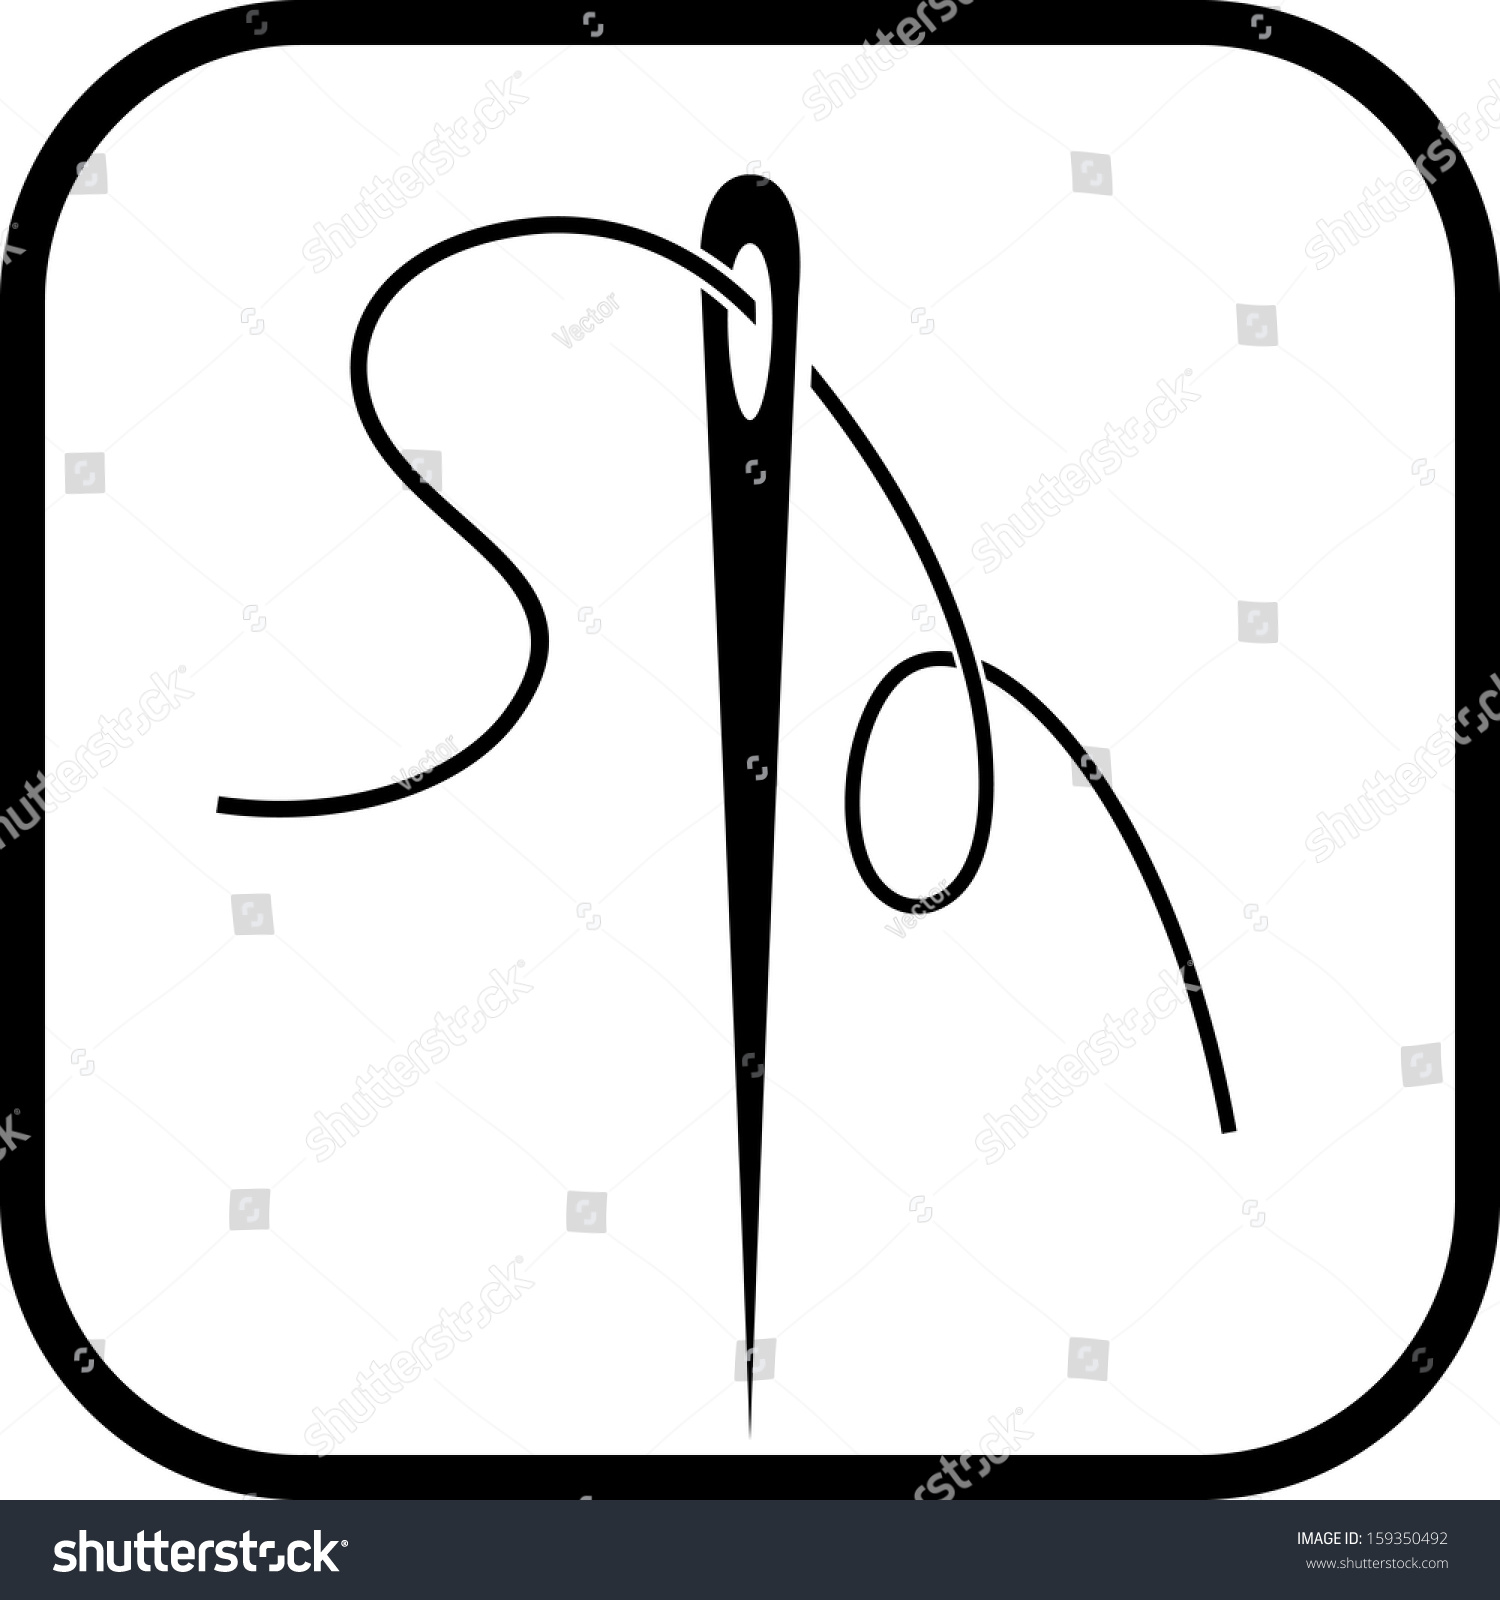 Needle And Thread Vector Icon - 159350492 : Shutterstock